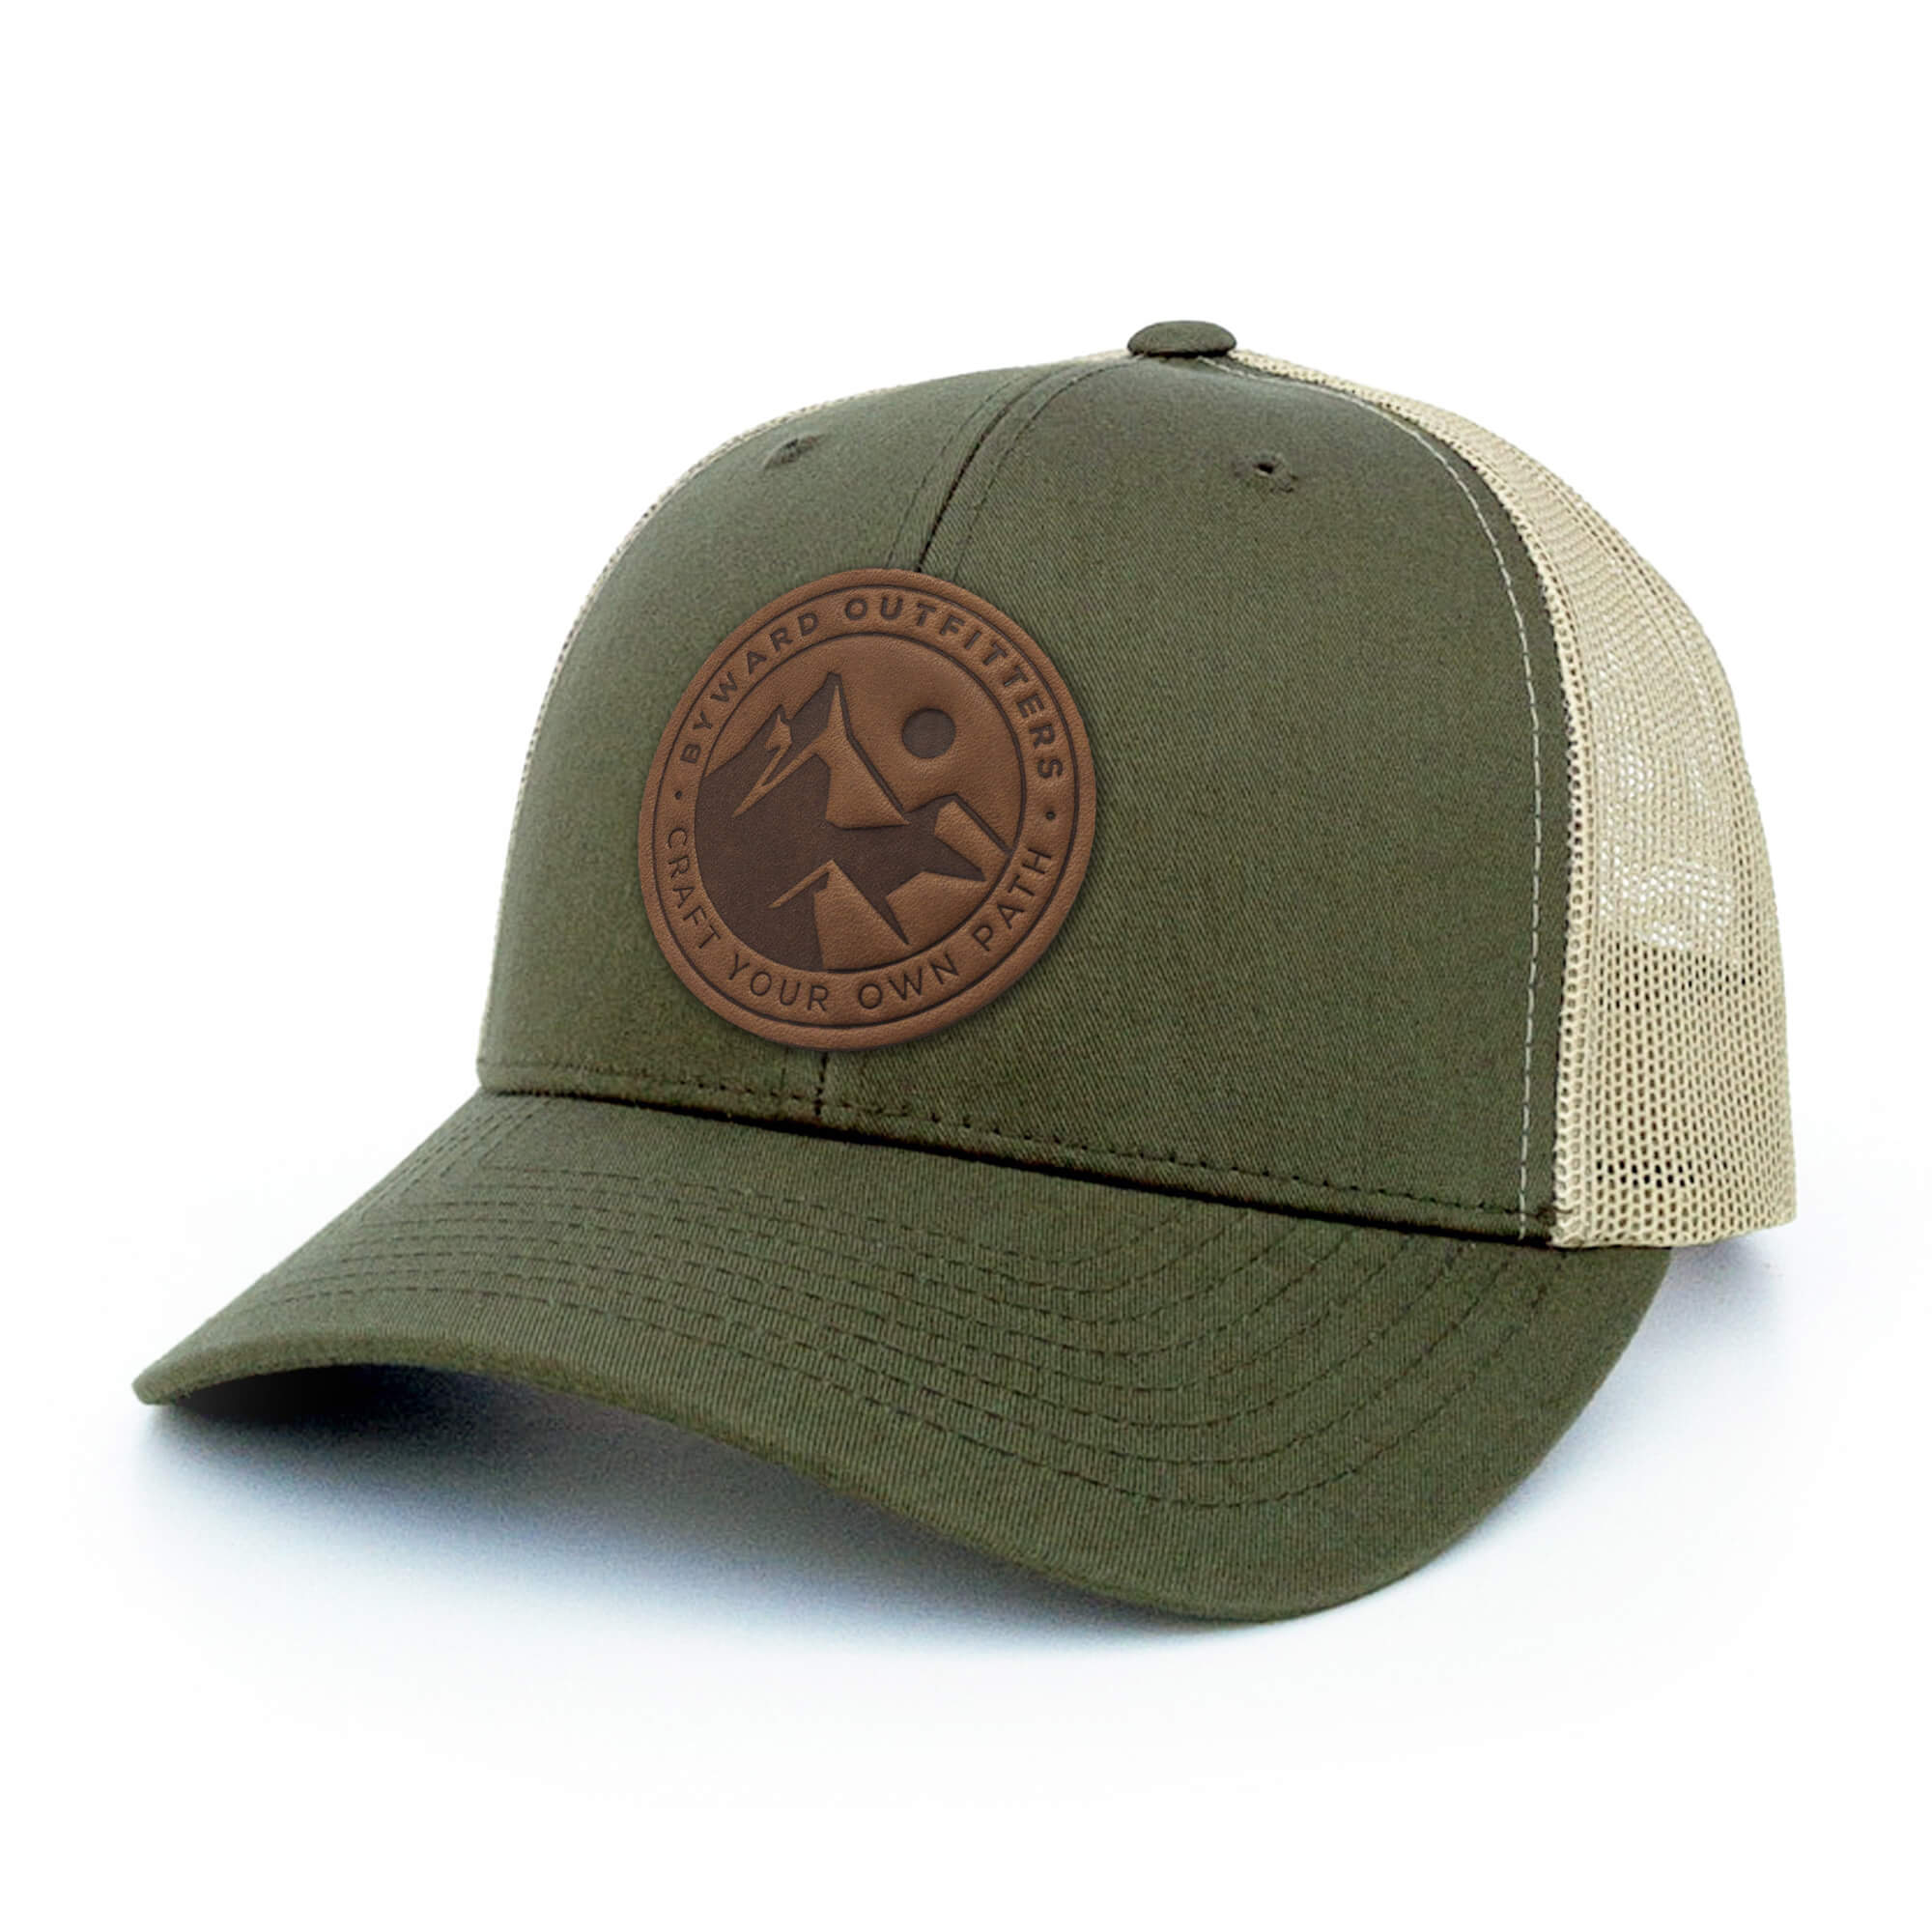 Moss green and khaki trucker hat with full-grain leather patch of a Mountain Escape | BLACK-005-005, CHARC-005-005, NAVY-005-005, HGREY-005-005, MOSS-005-005, BROWN-005-005